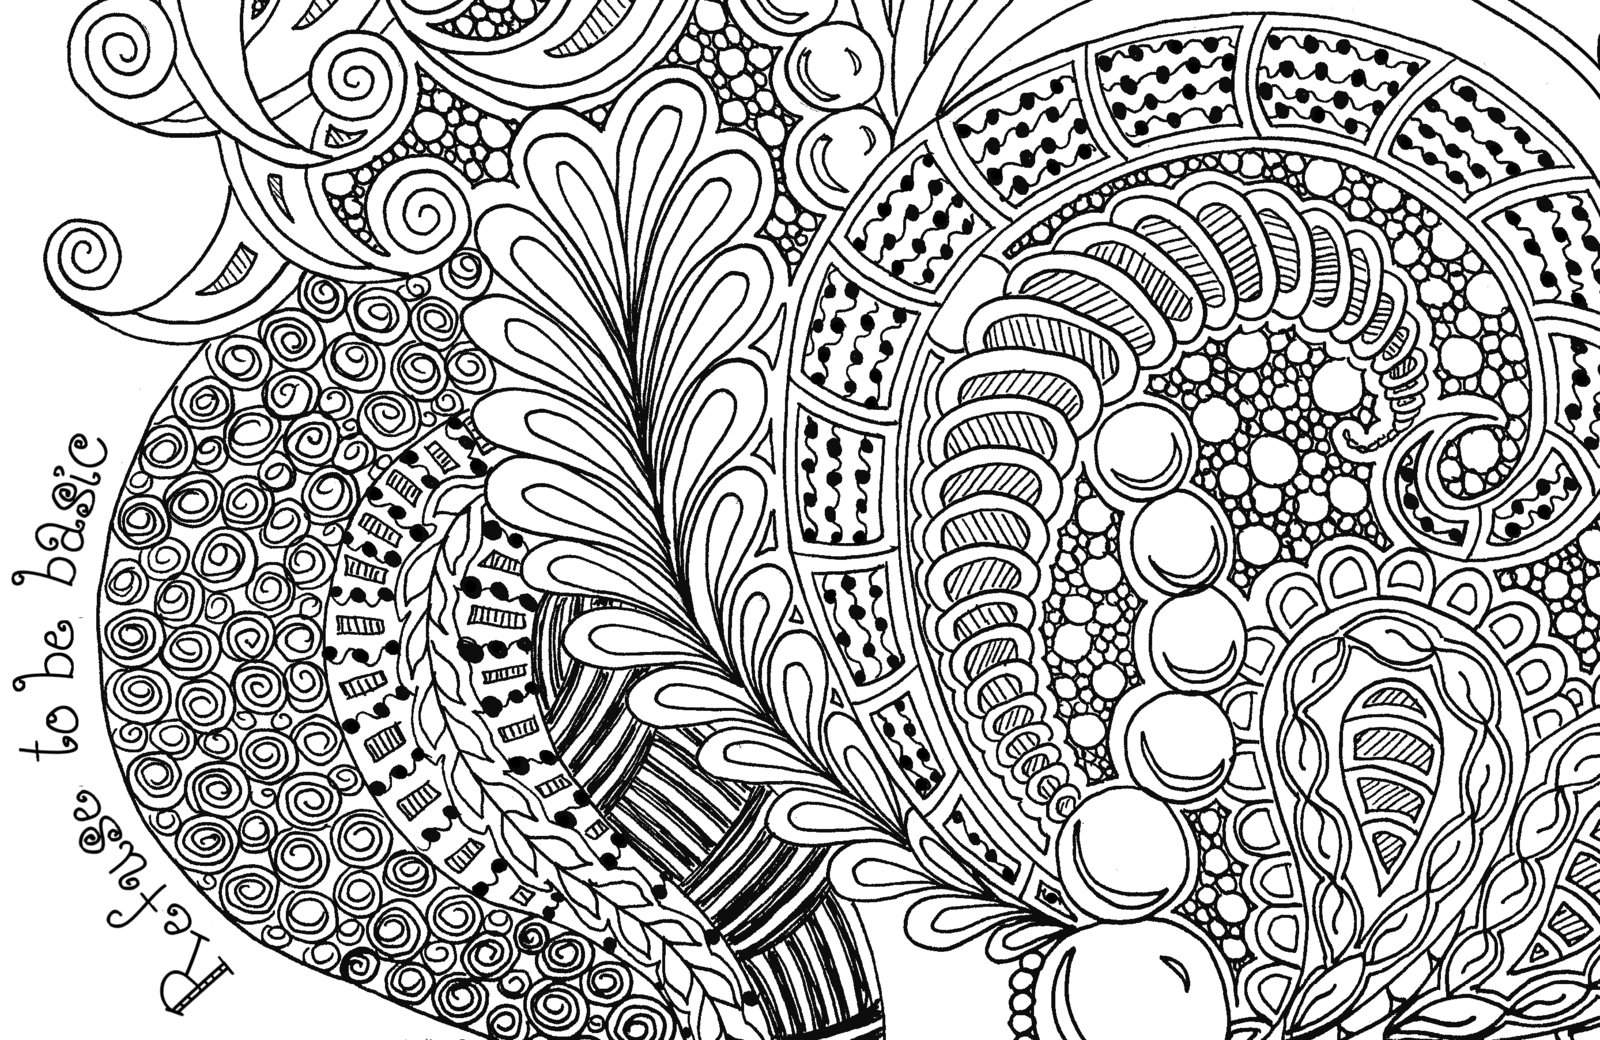 Printable Zentangle Coloring Pages Free - Coloring Home